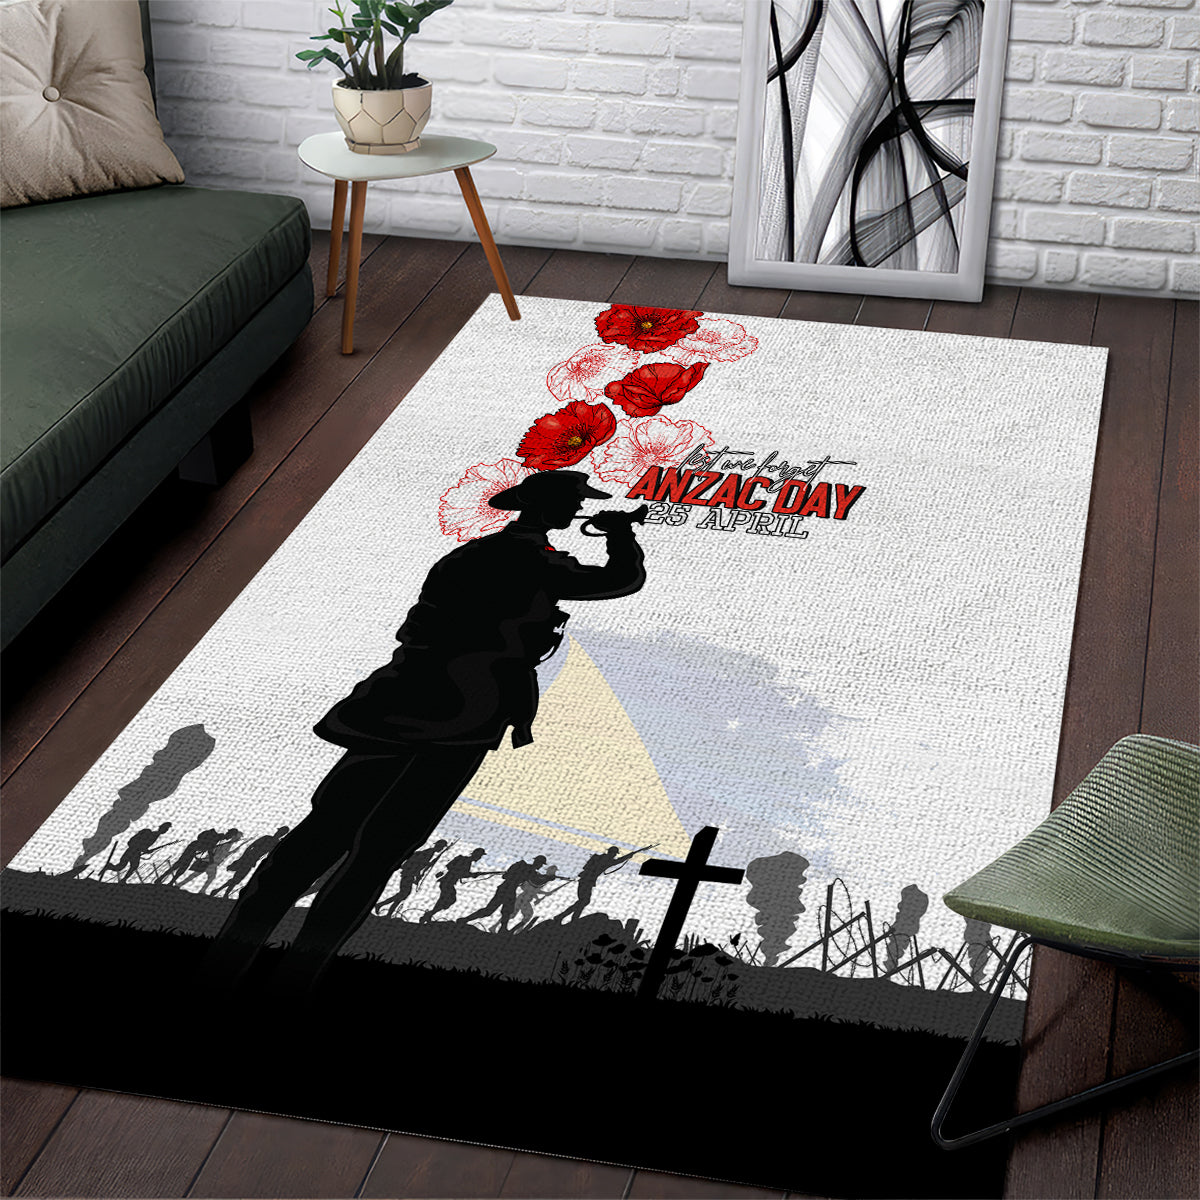 Tokelau ANZAC Day Area Rug Lest We Forget Red Poppy Flowers and Soldier LT03 White - Polynesian Pride